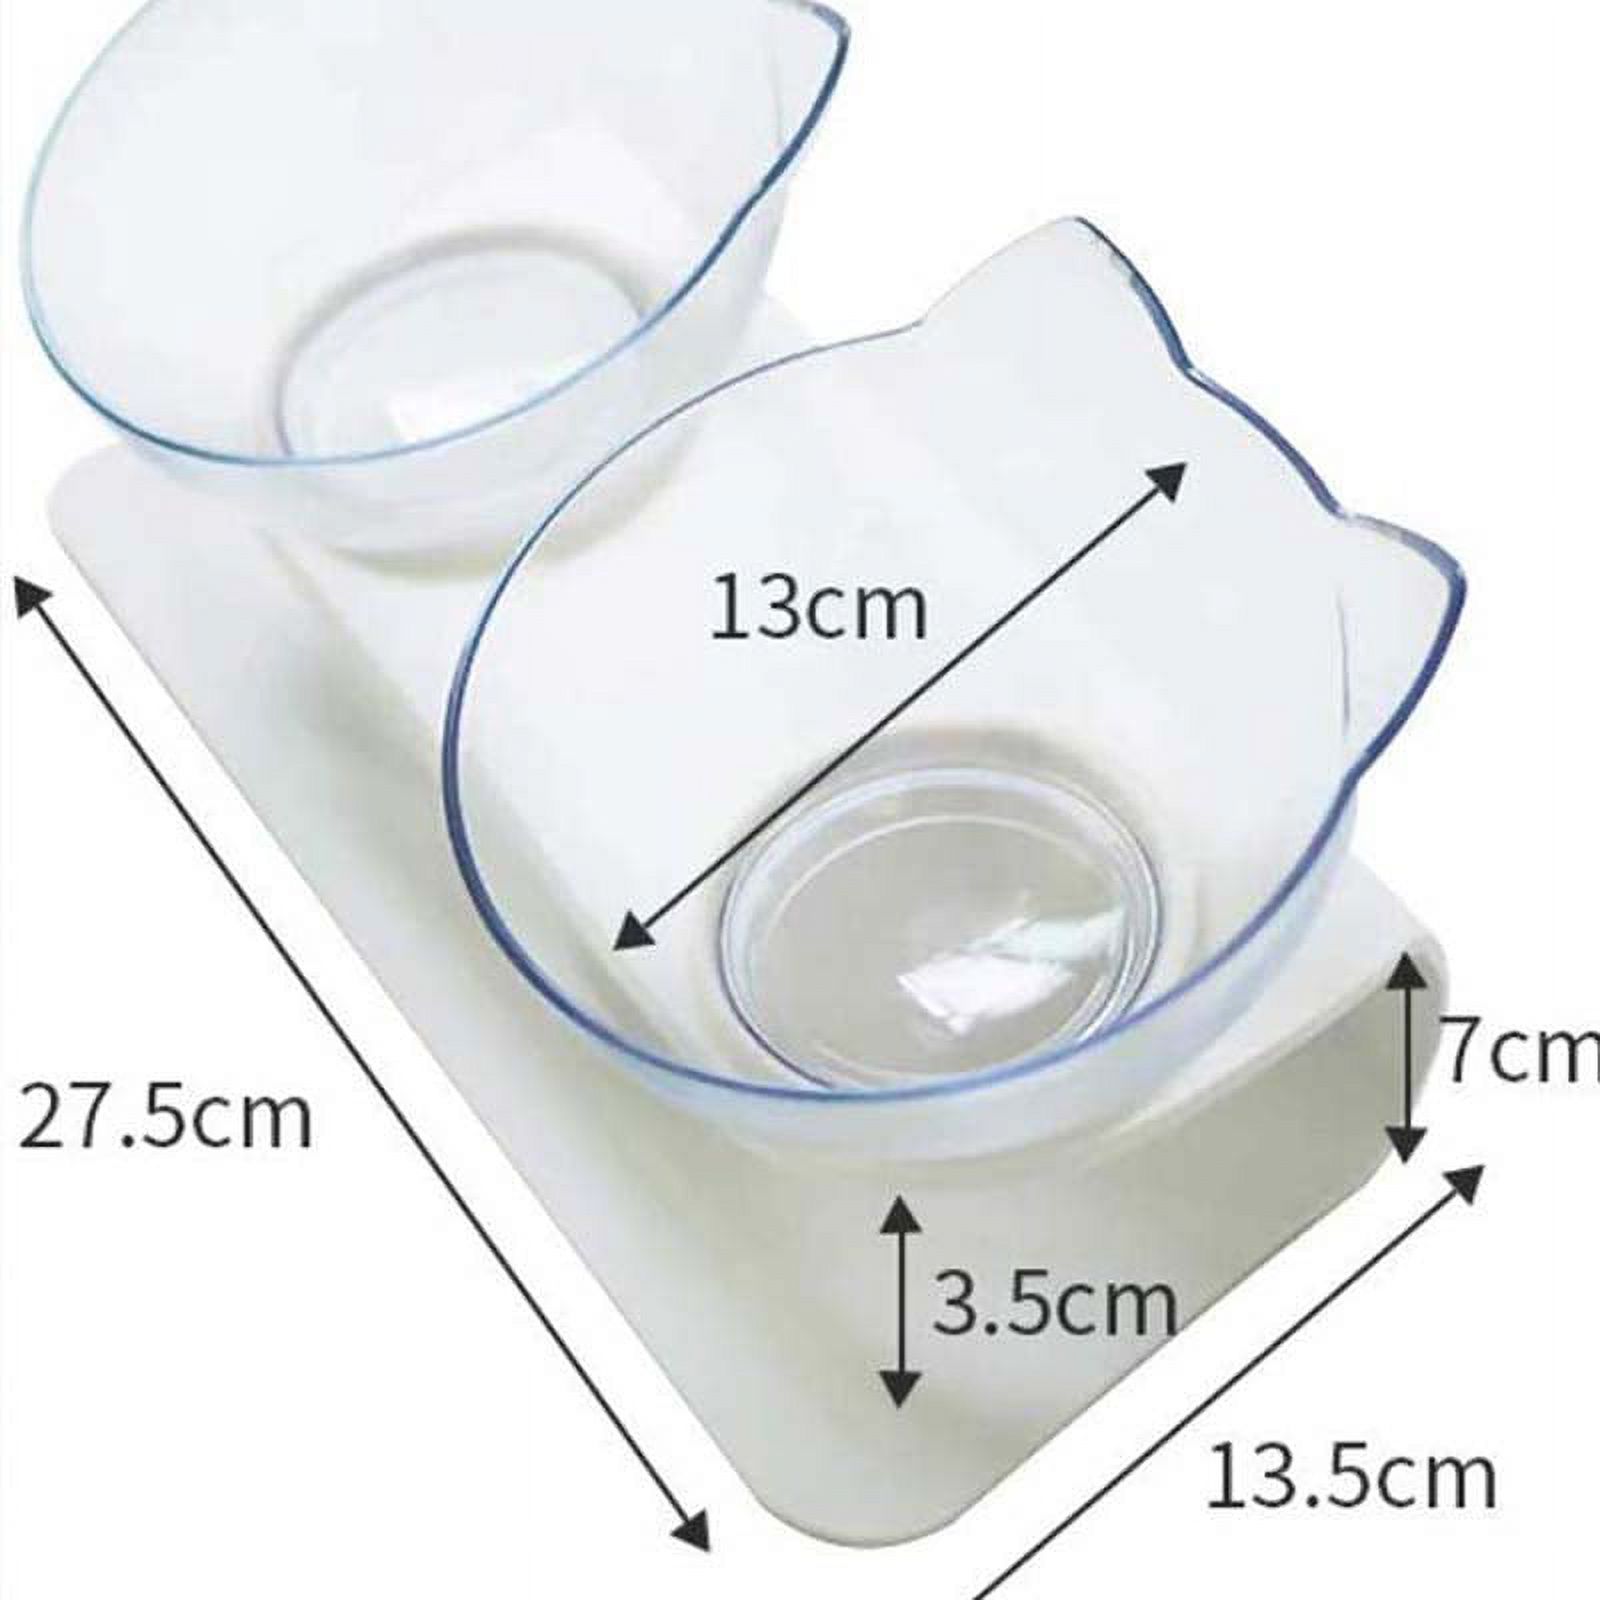 Cat Elevated Bowl,Transparent Cat Bowl With Holder Anti-slip,Pet Feeding Bowl, Raised The Bottom for Cats and Small Dogs, Cute Cat Face Single Double Bowl - image 3 of 9